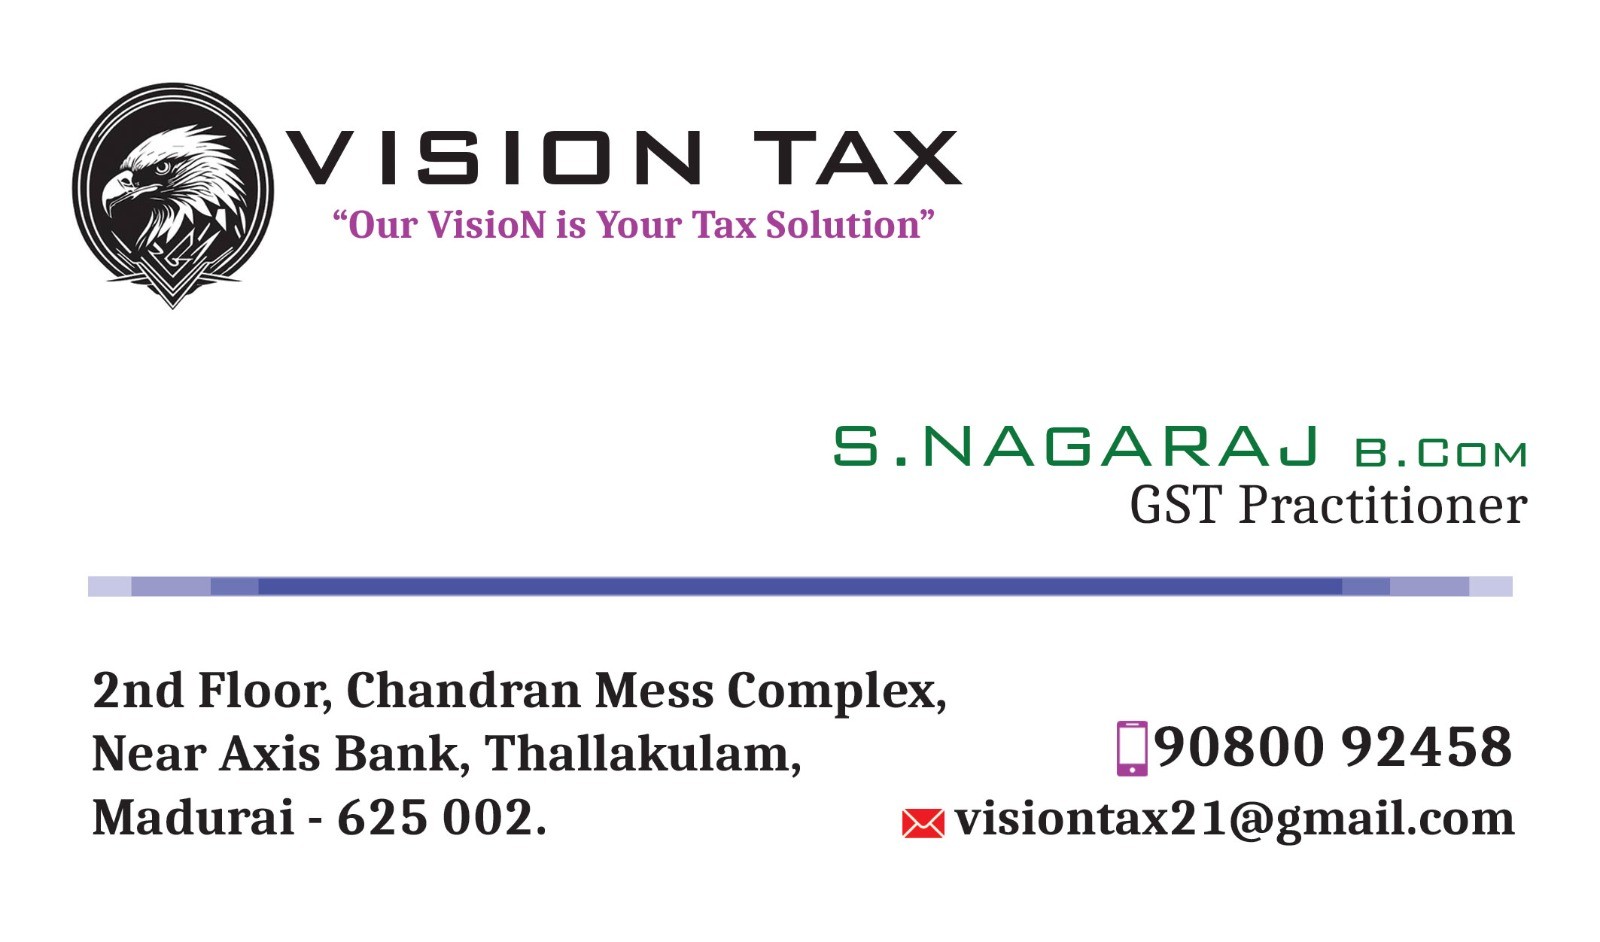 Tax Preparation, Accounting/ Tax services; Exp: More than 5 year